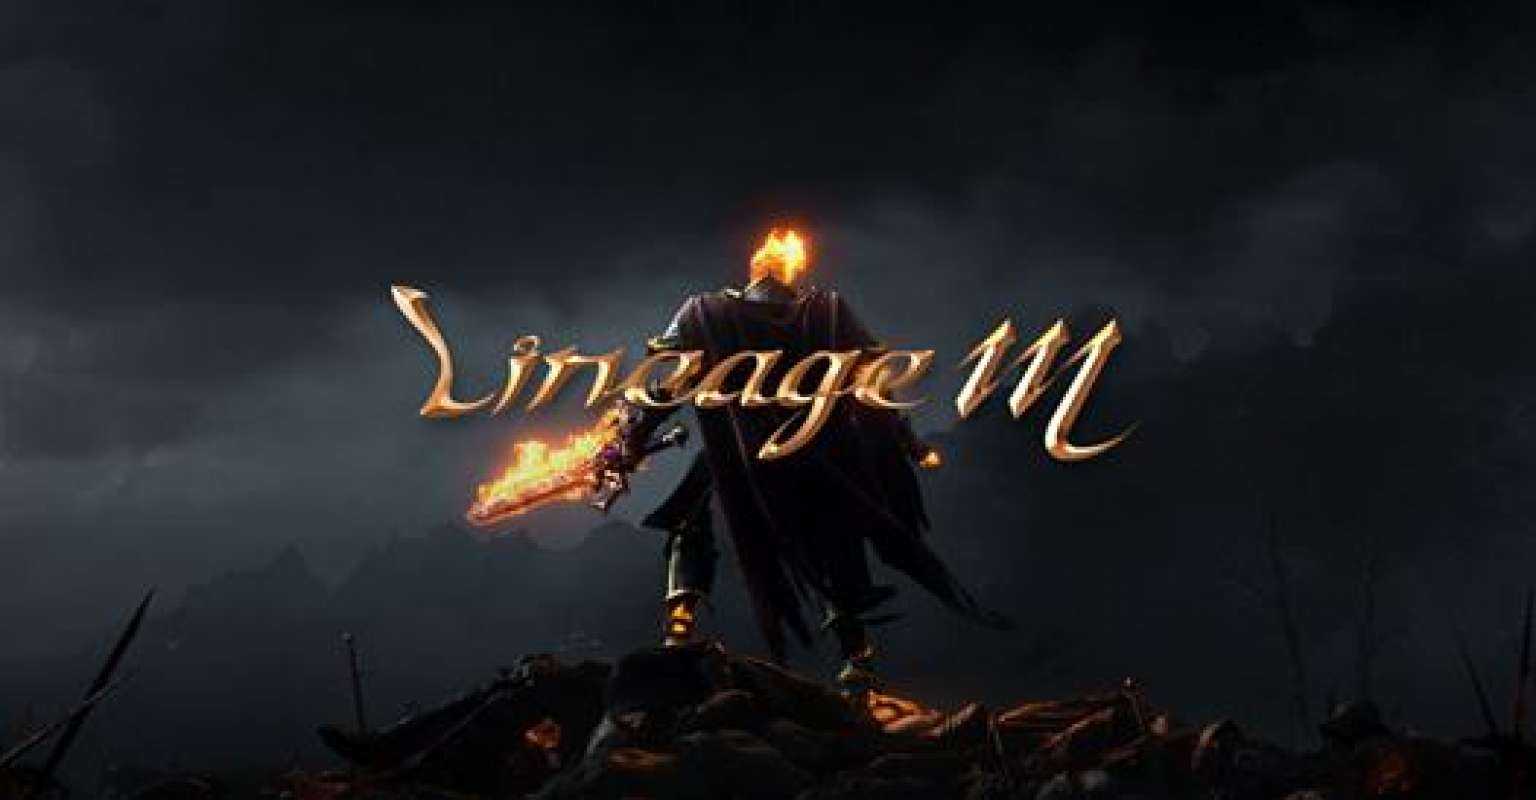 Lineage M